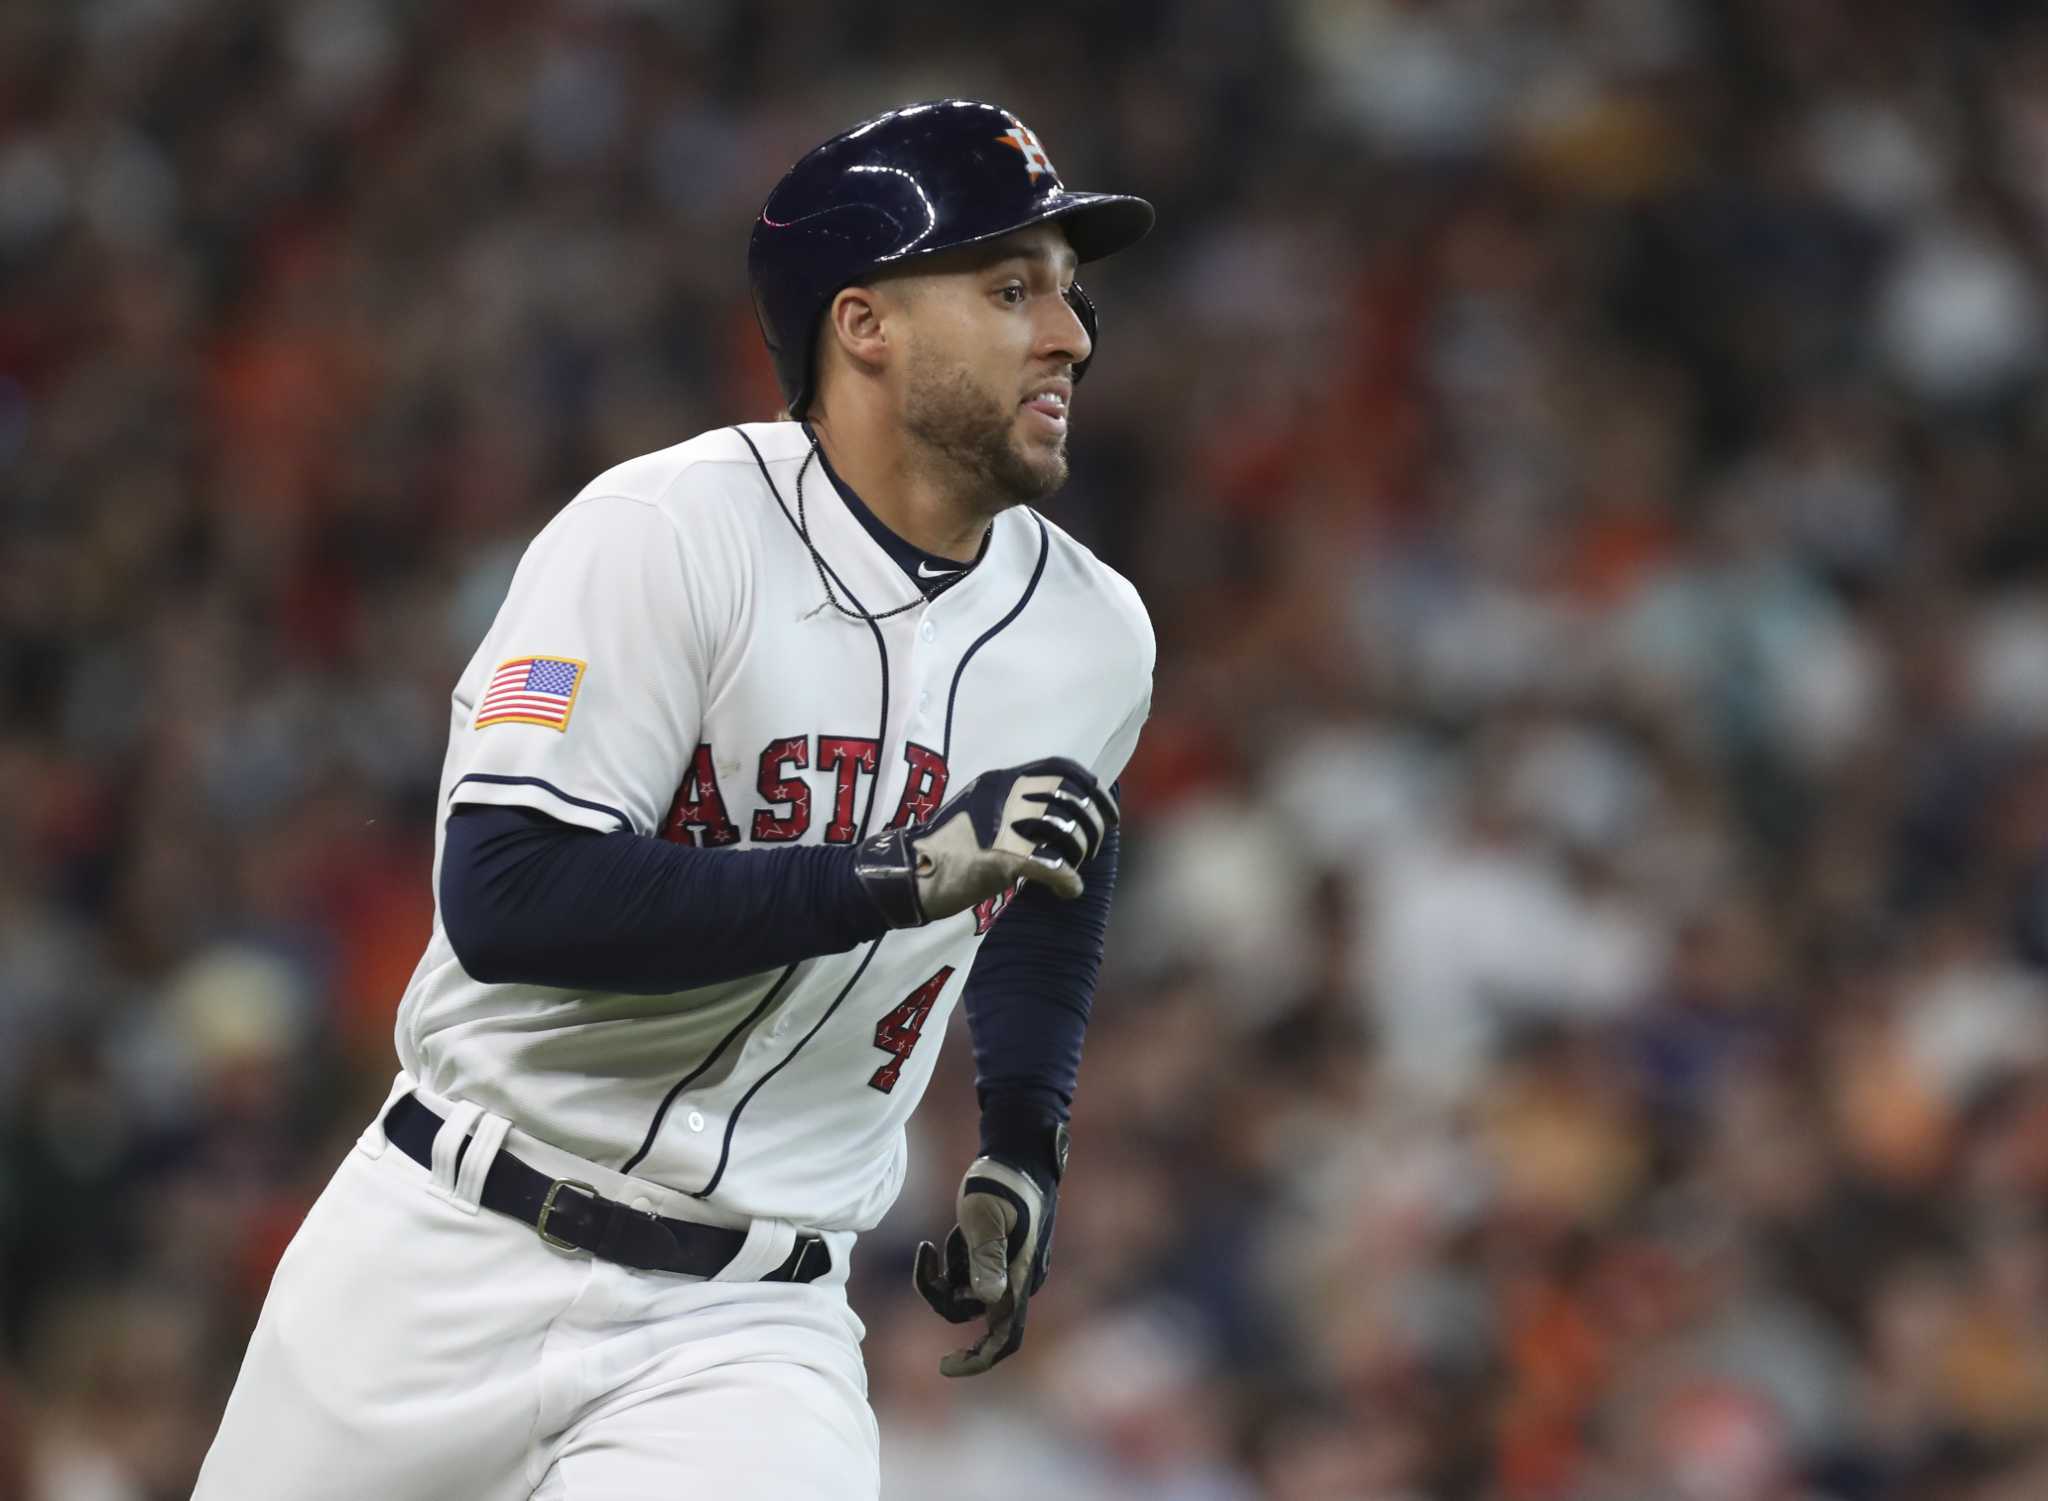 Walk-up song for each Houston Astros player this postseason